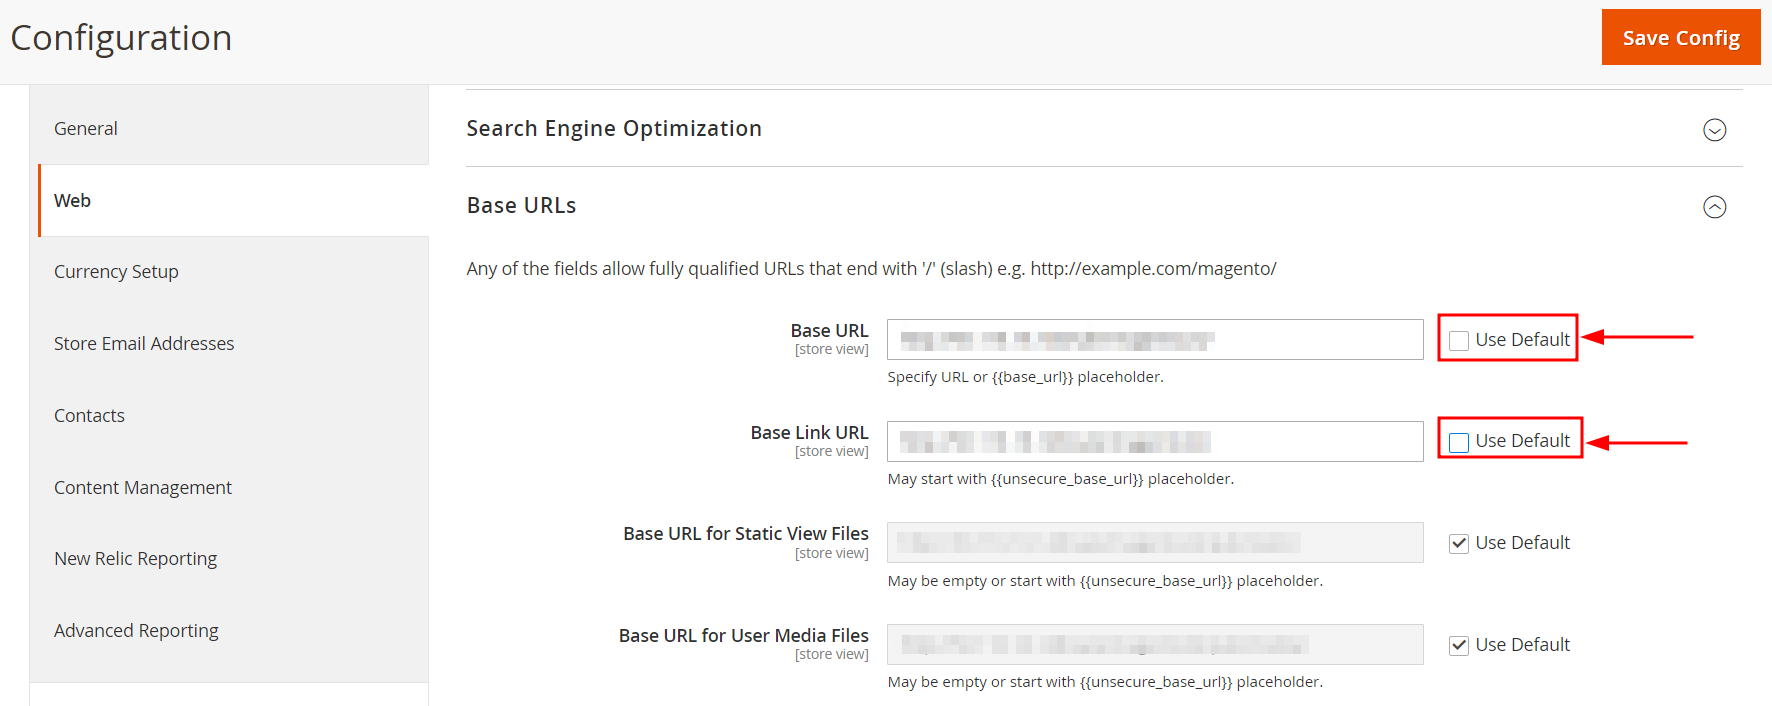 step 4: uncheck “Base URL” and “Base Link URL” in “Base URLs” section